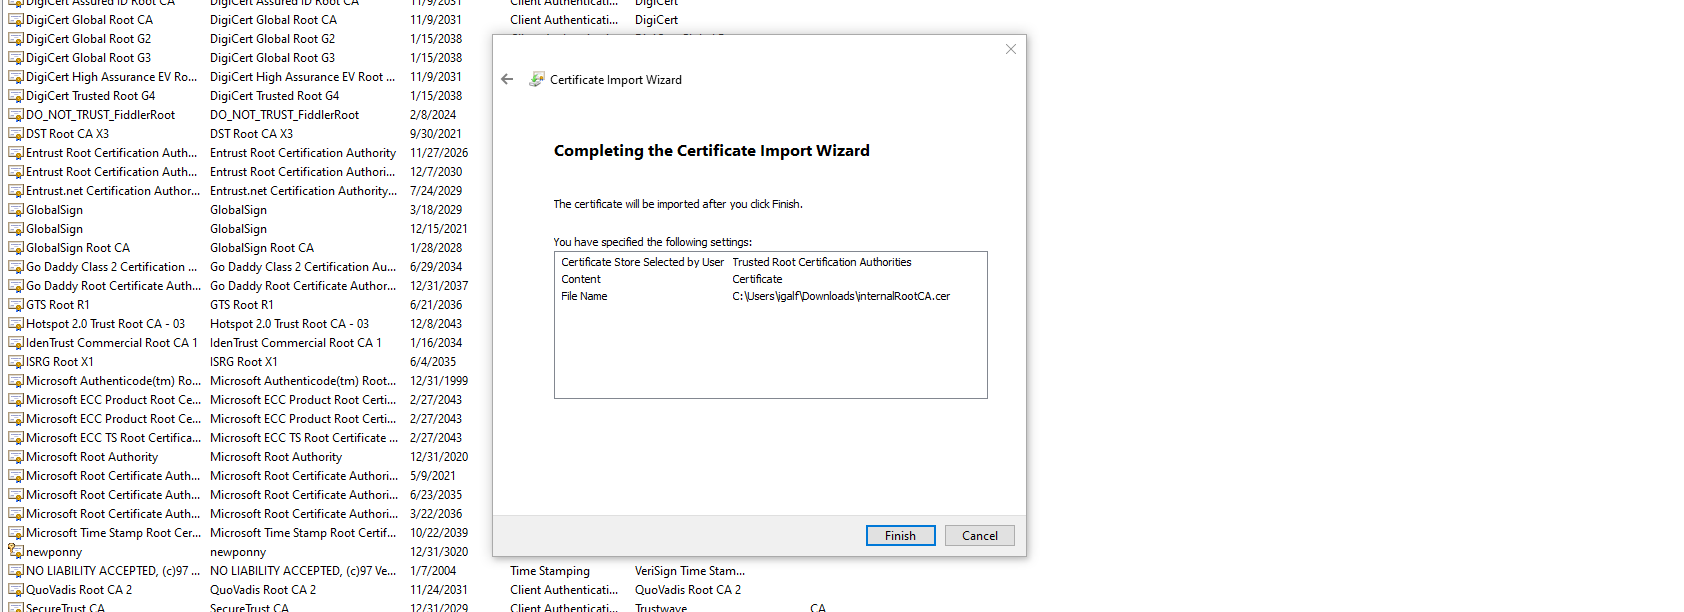 Finish Root Certificate import